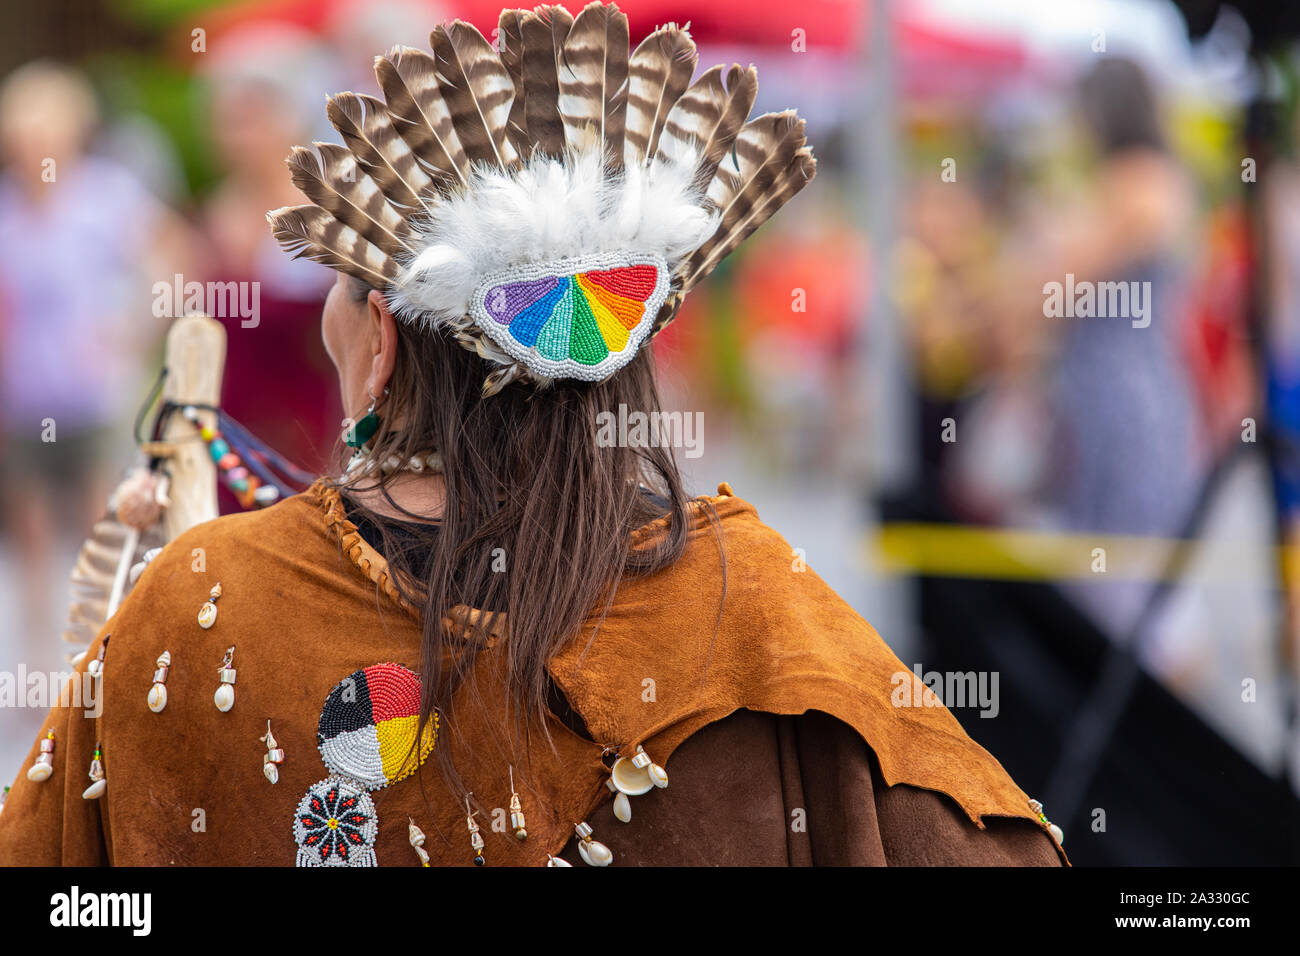 A close up view on the back of a woman's head, dressed in traditional indigenous costume, with eagle feathered headdress during a celebration of native culture. Stock Photo